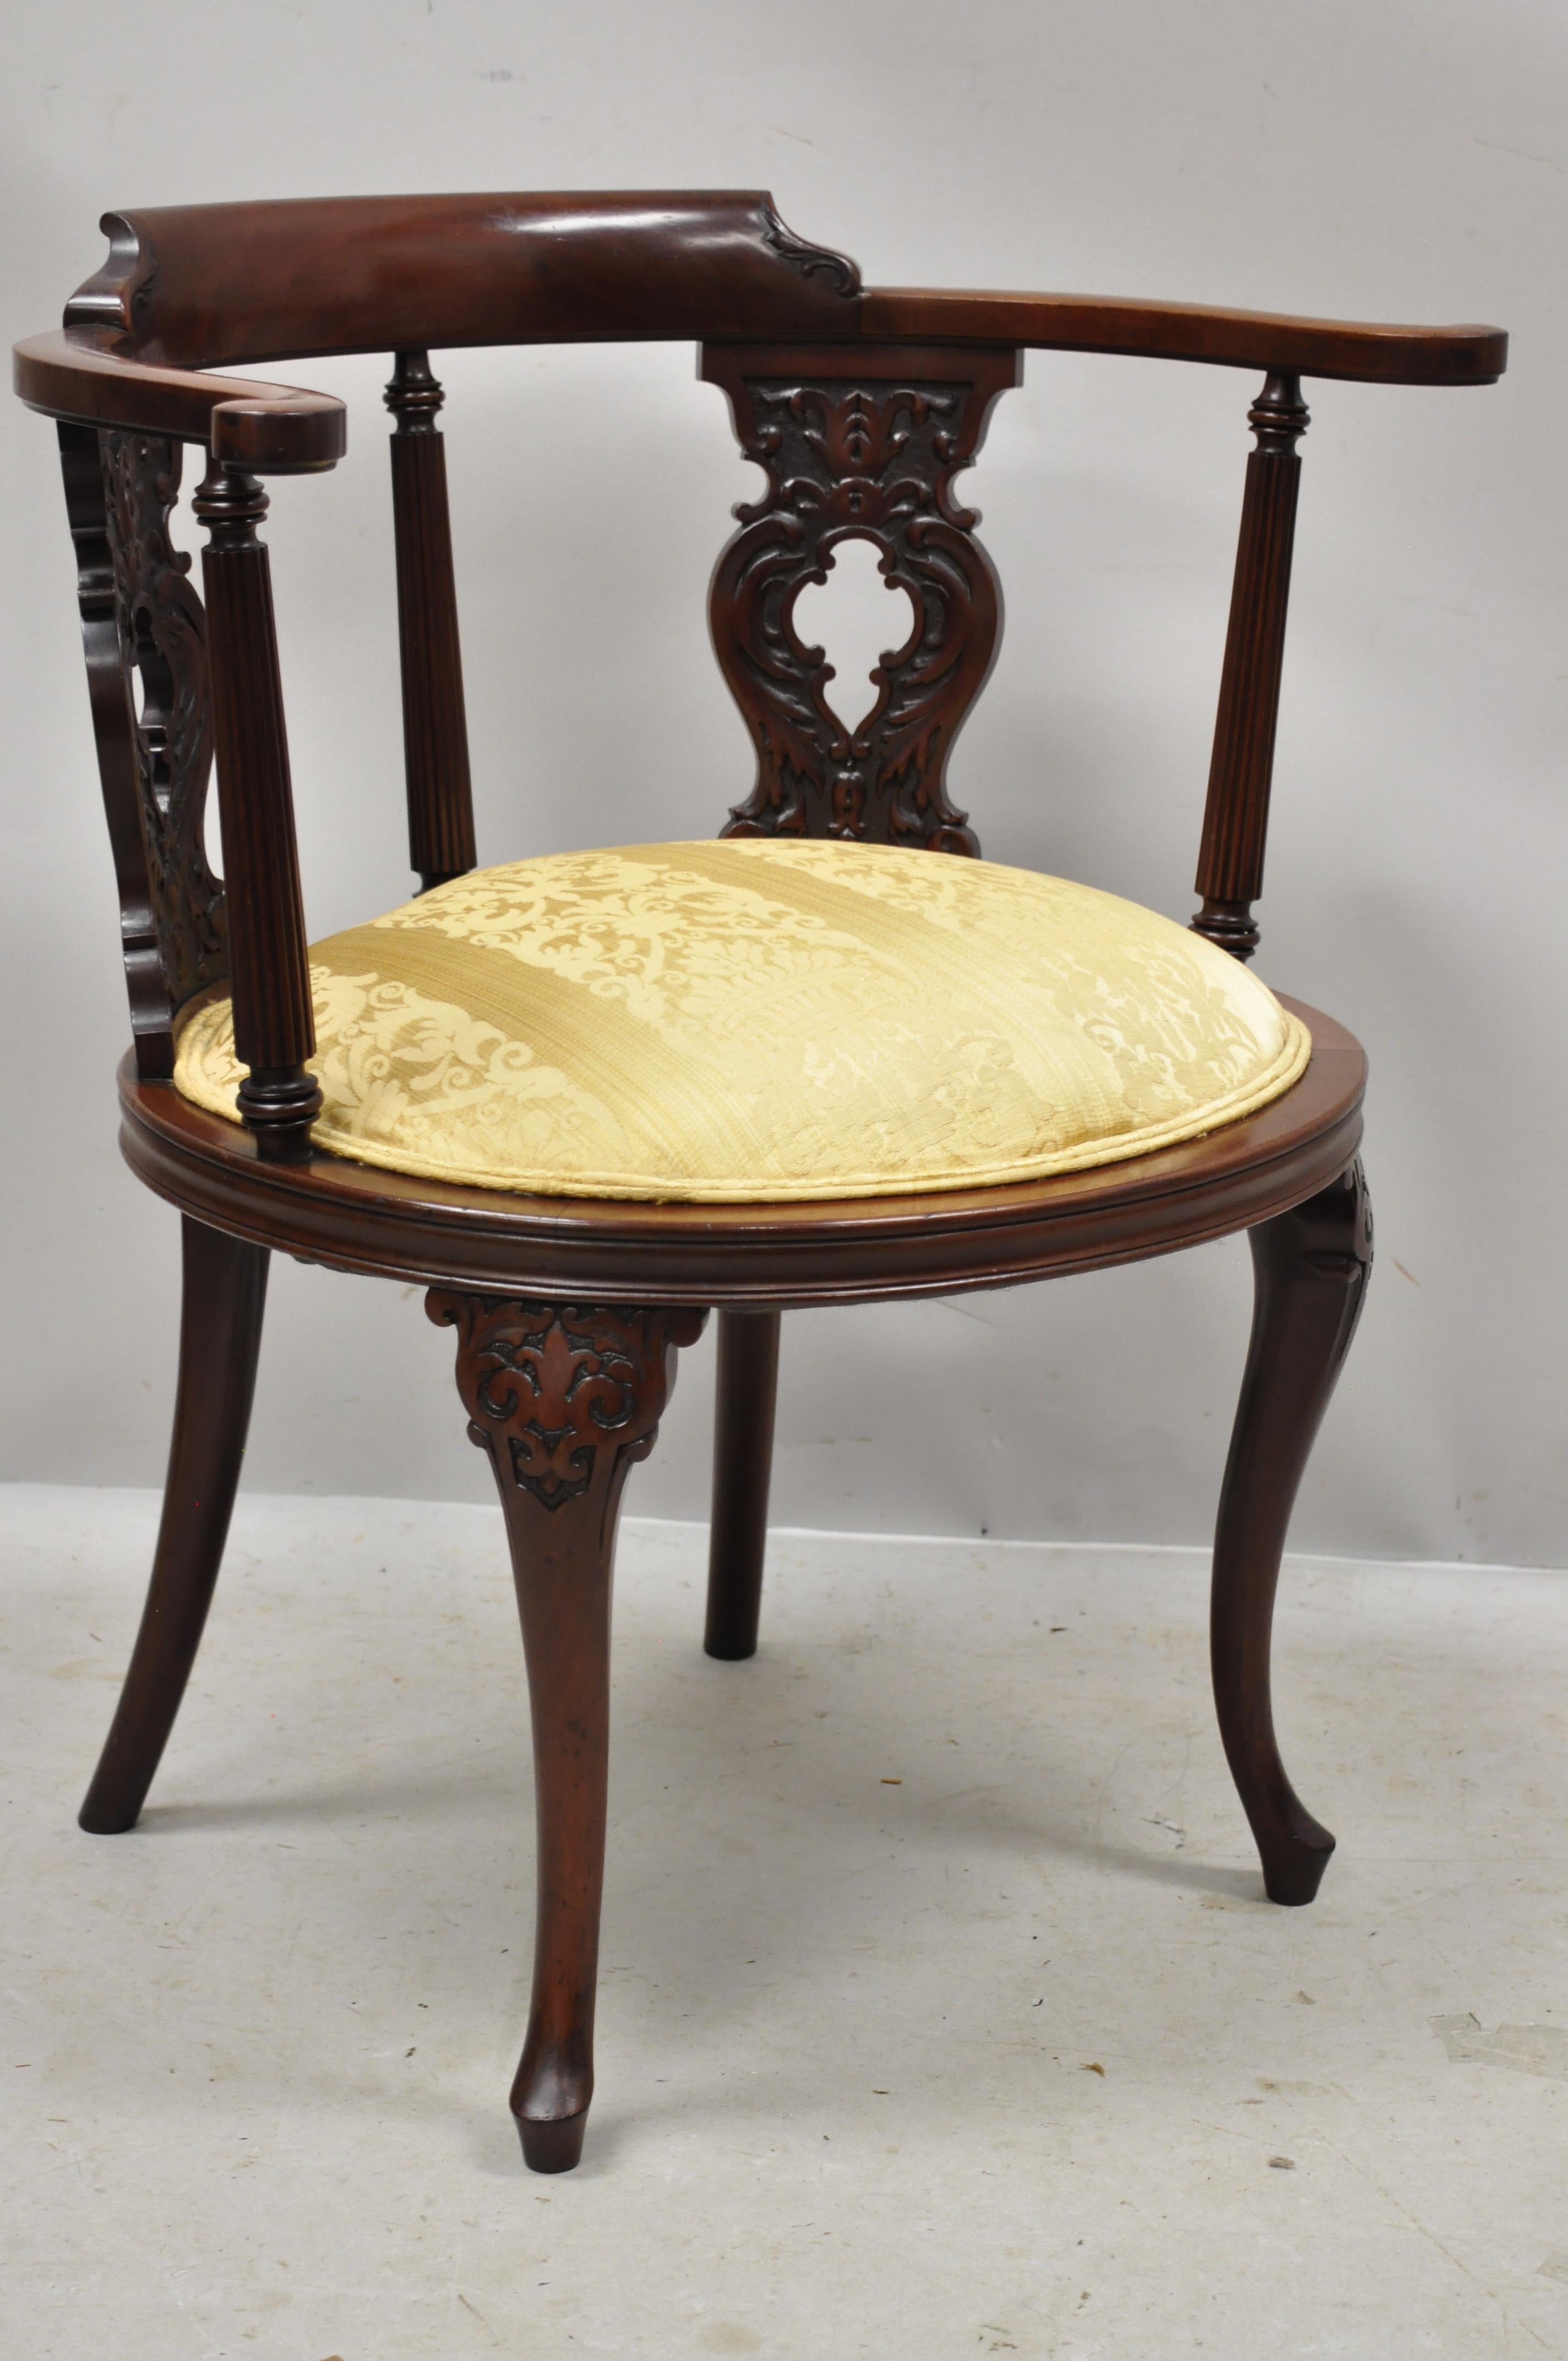 Antique Victorian French style carved mahogany vanity accent side chair. Item features solid wood construction, beautiful wood grain, gold upholstered seat, nicely carved details, cabriole legs, very nice antique item, great style and form, circa